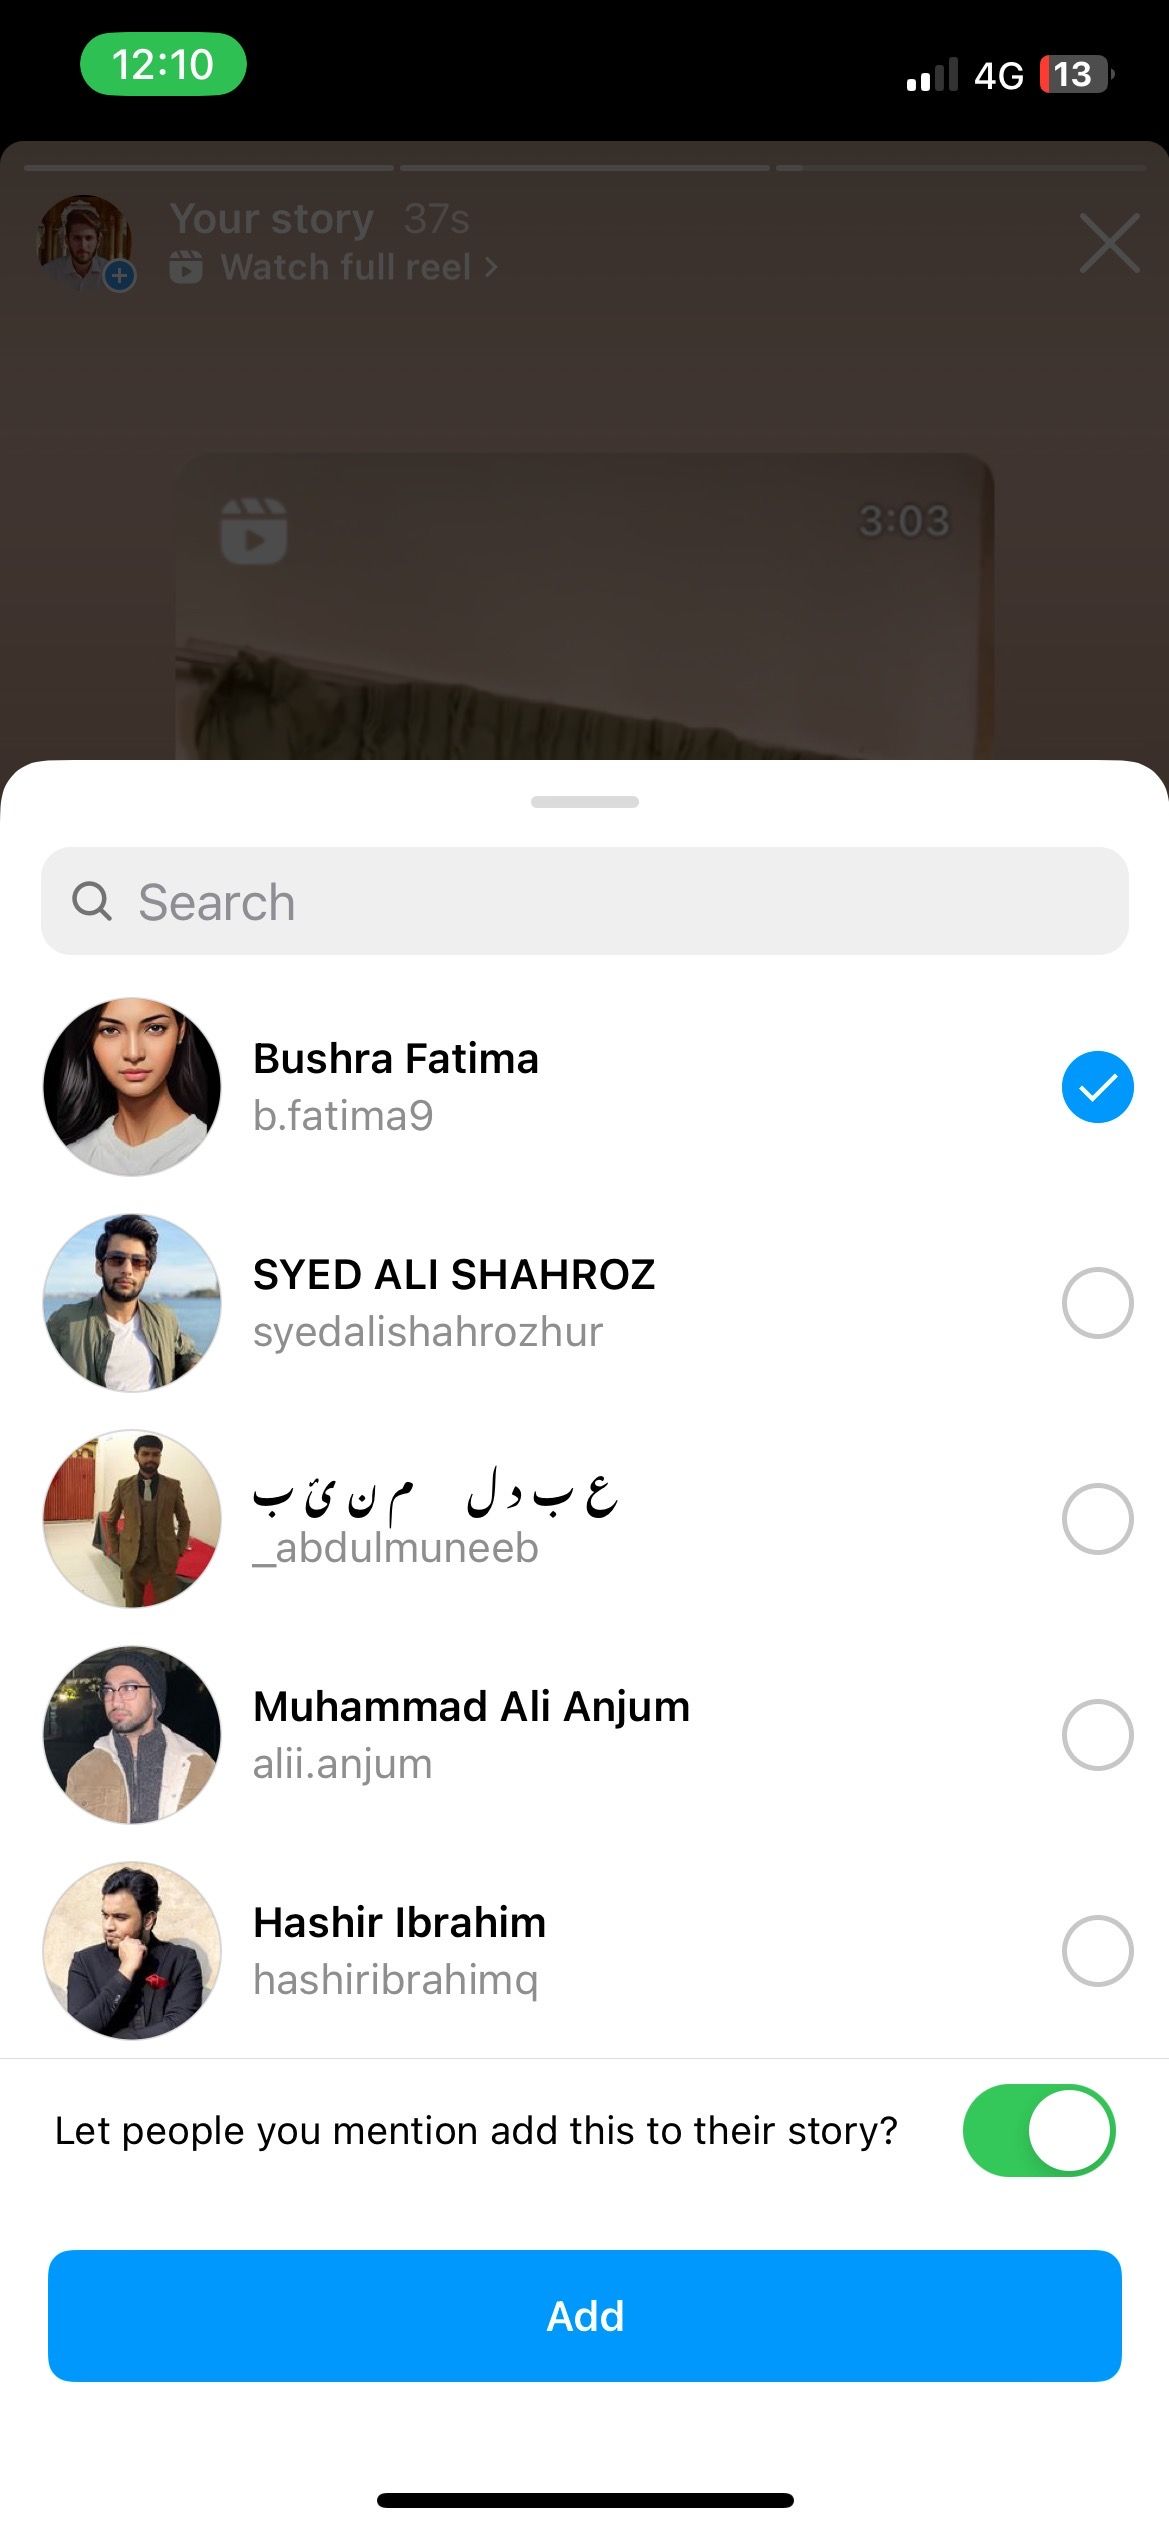 Select the username to add mention